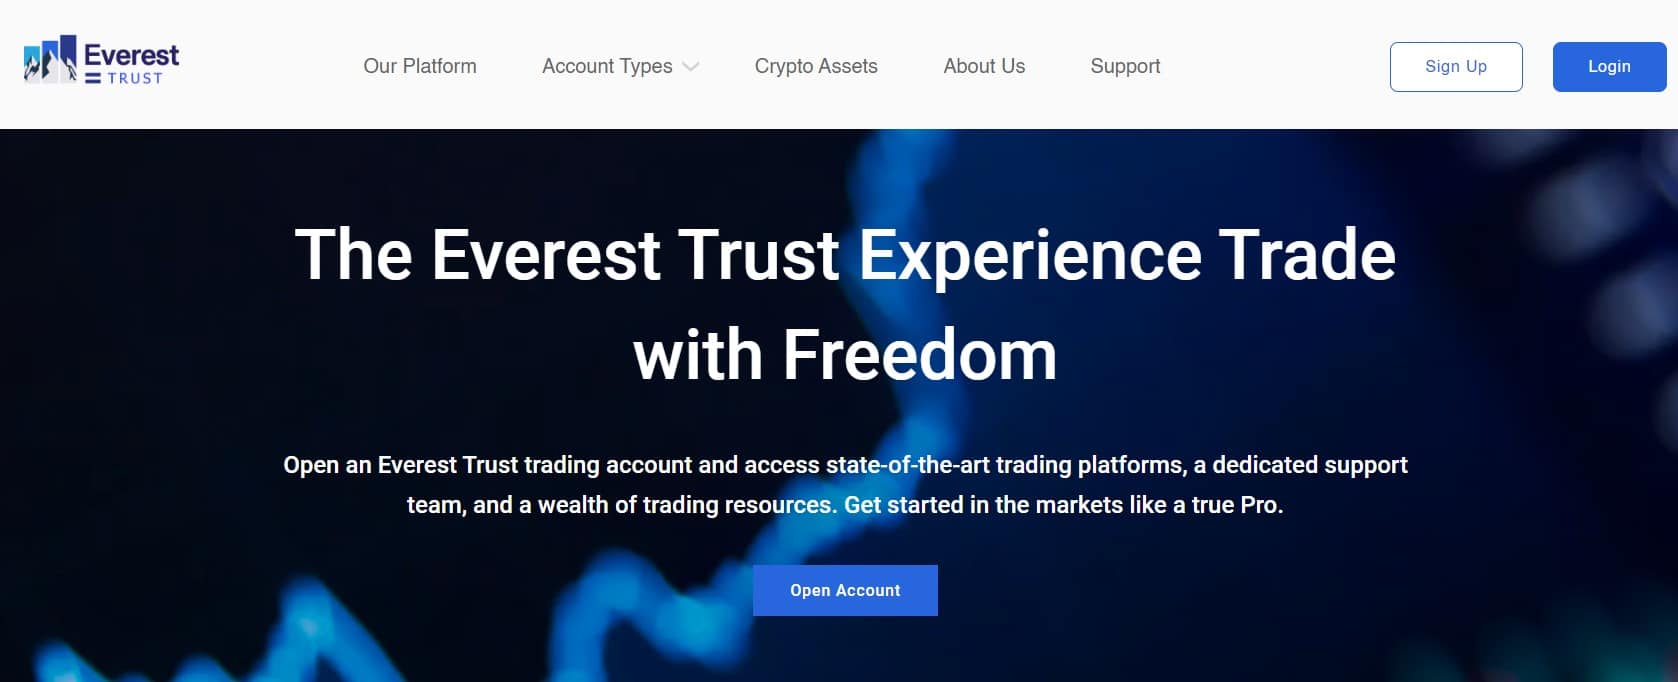 Everest Trust Trade with Freedom